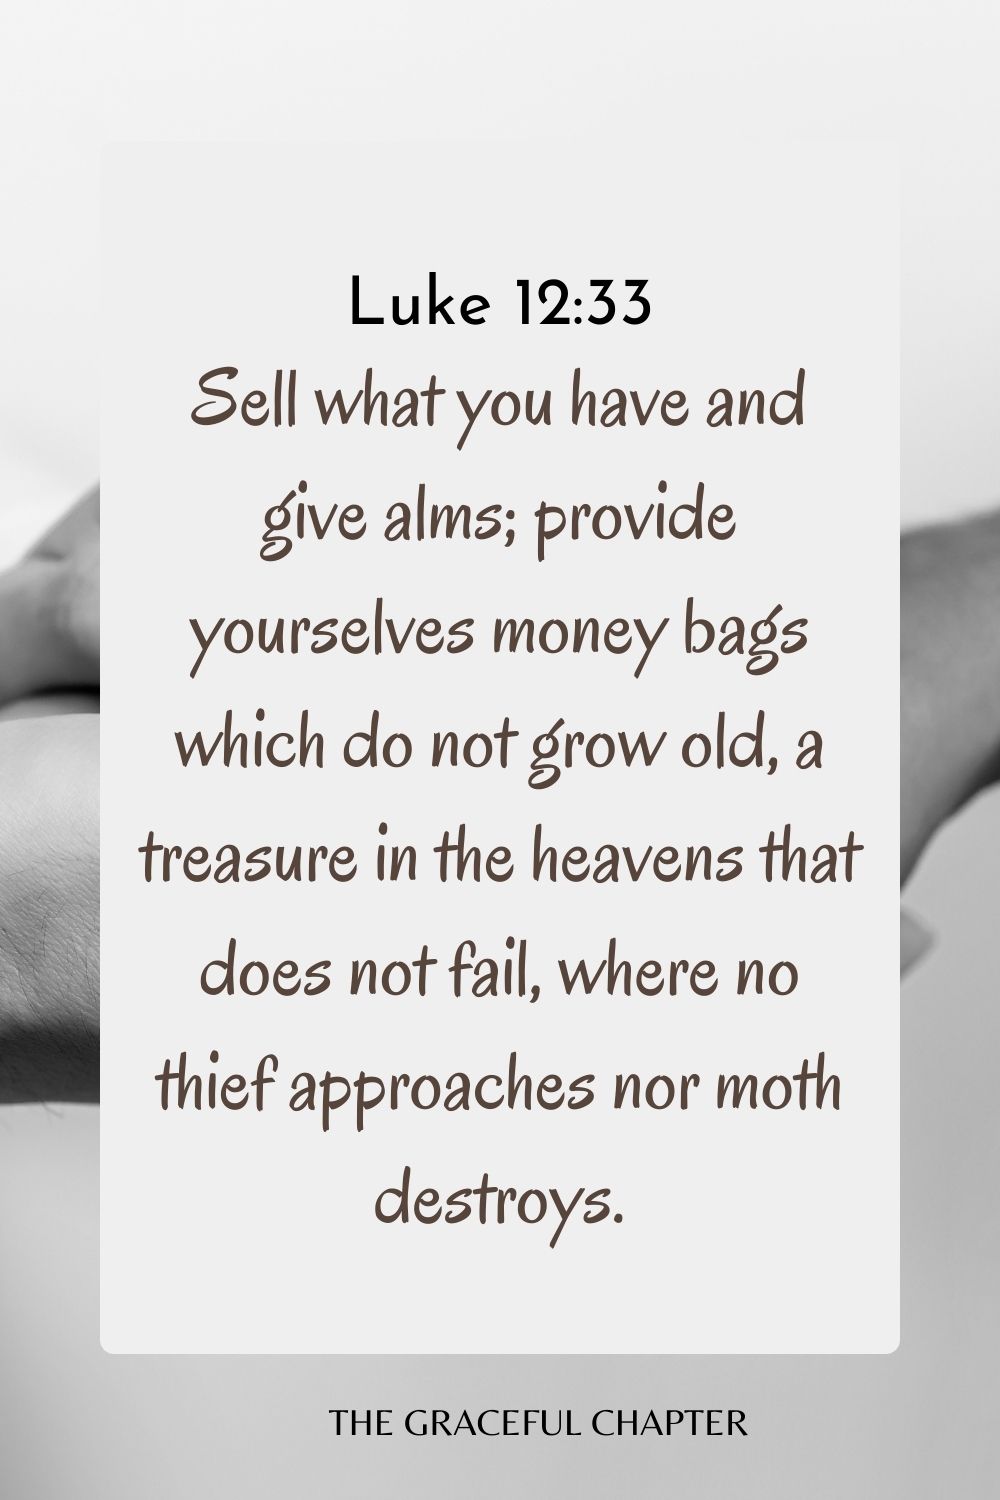 Sell what you have and give alms; provide yourselves money bags which do not grow old, a treasure in the heavens that does not fail, where no thief approaches nor moth destroys. Luke 12:33